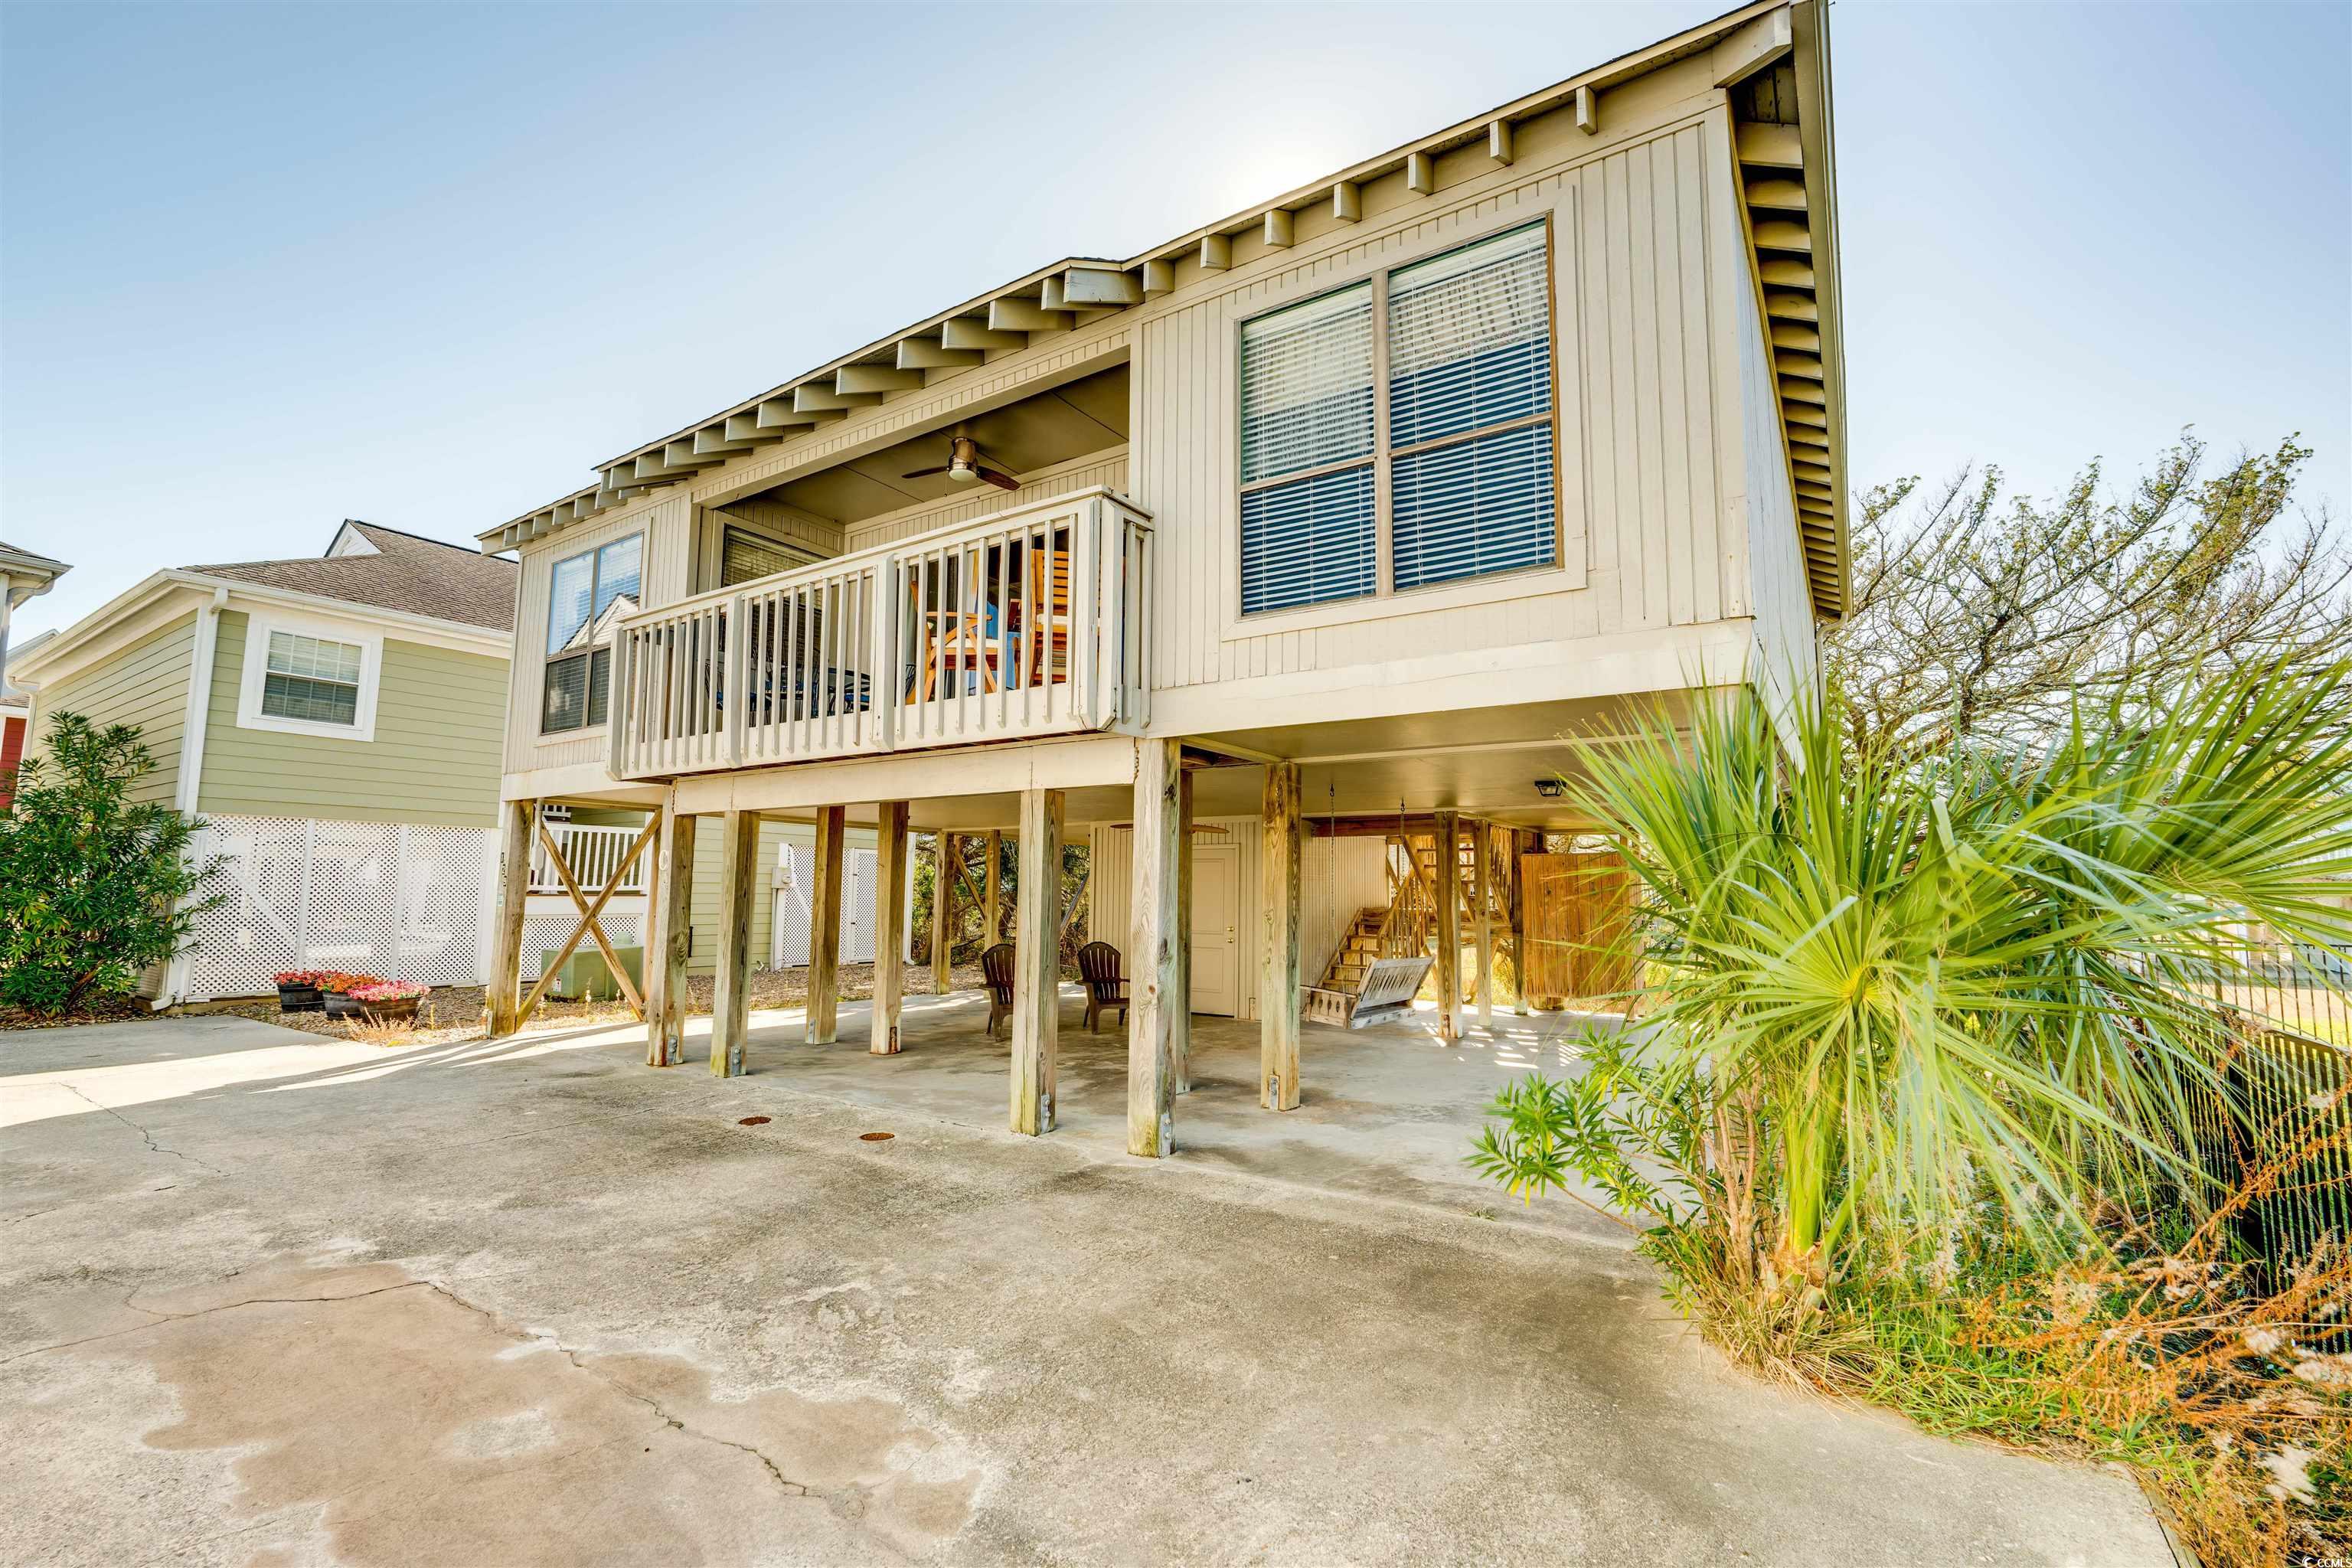 this charming beach getaway features three bedrooms, two baths, full kitchen, breakfast bar and balcony. located one block from the beach with convenient public access across ocean boulevard. cypress place is an 8-home cottage community that includes a community pool. the home includes an attached storage room downstairs and covered parking underneath. the hoa includes water/sewer, pool service, cable & internet, and landscaping. the property is sold furnished and turn-key ready. this location is everything you need to enjoy the beach and the surrounding dining activities. all measurements and square footage are approximate and not guaranteed. buyers should verify.  full size washer/dryer located in storage area on ground level. this unique opportunity puts you a block off the beach in prime garden city beach location; very short walk to beach; well maintained! must see!